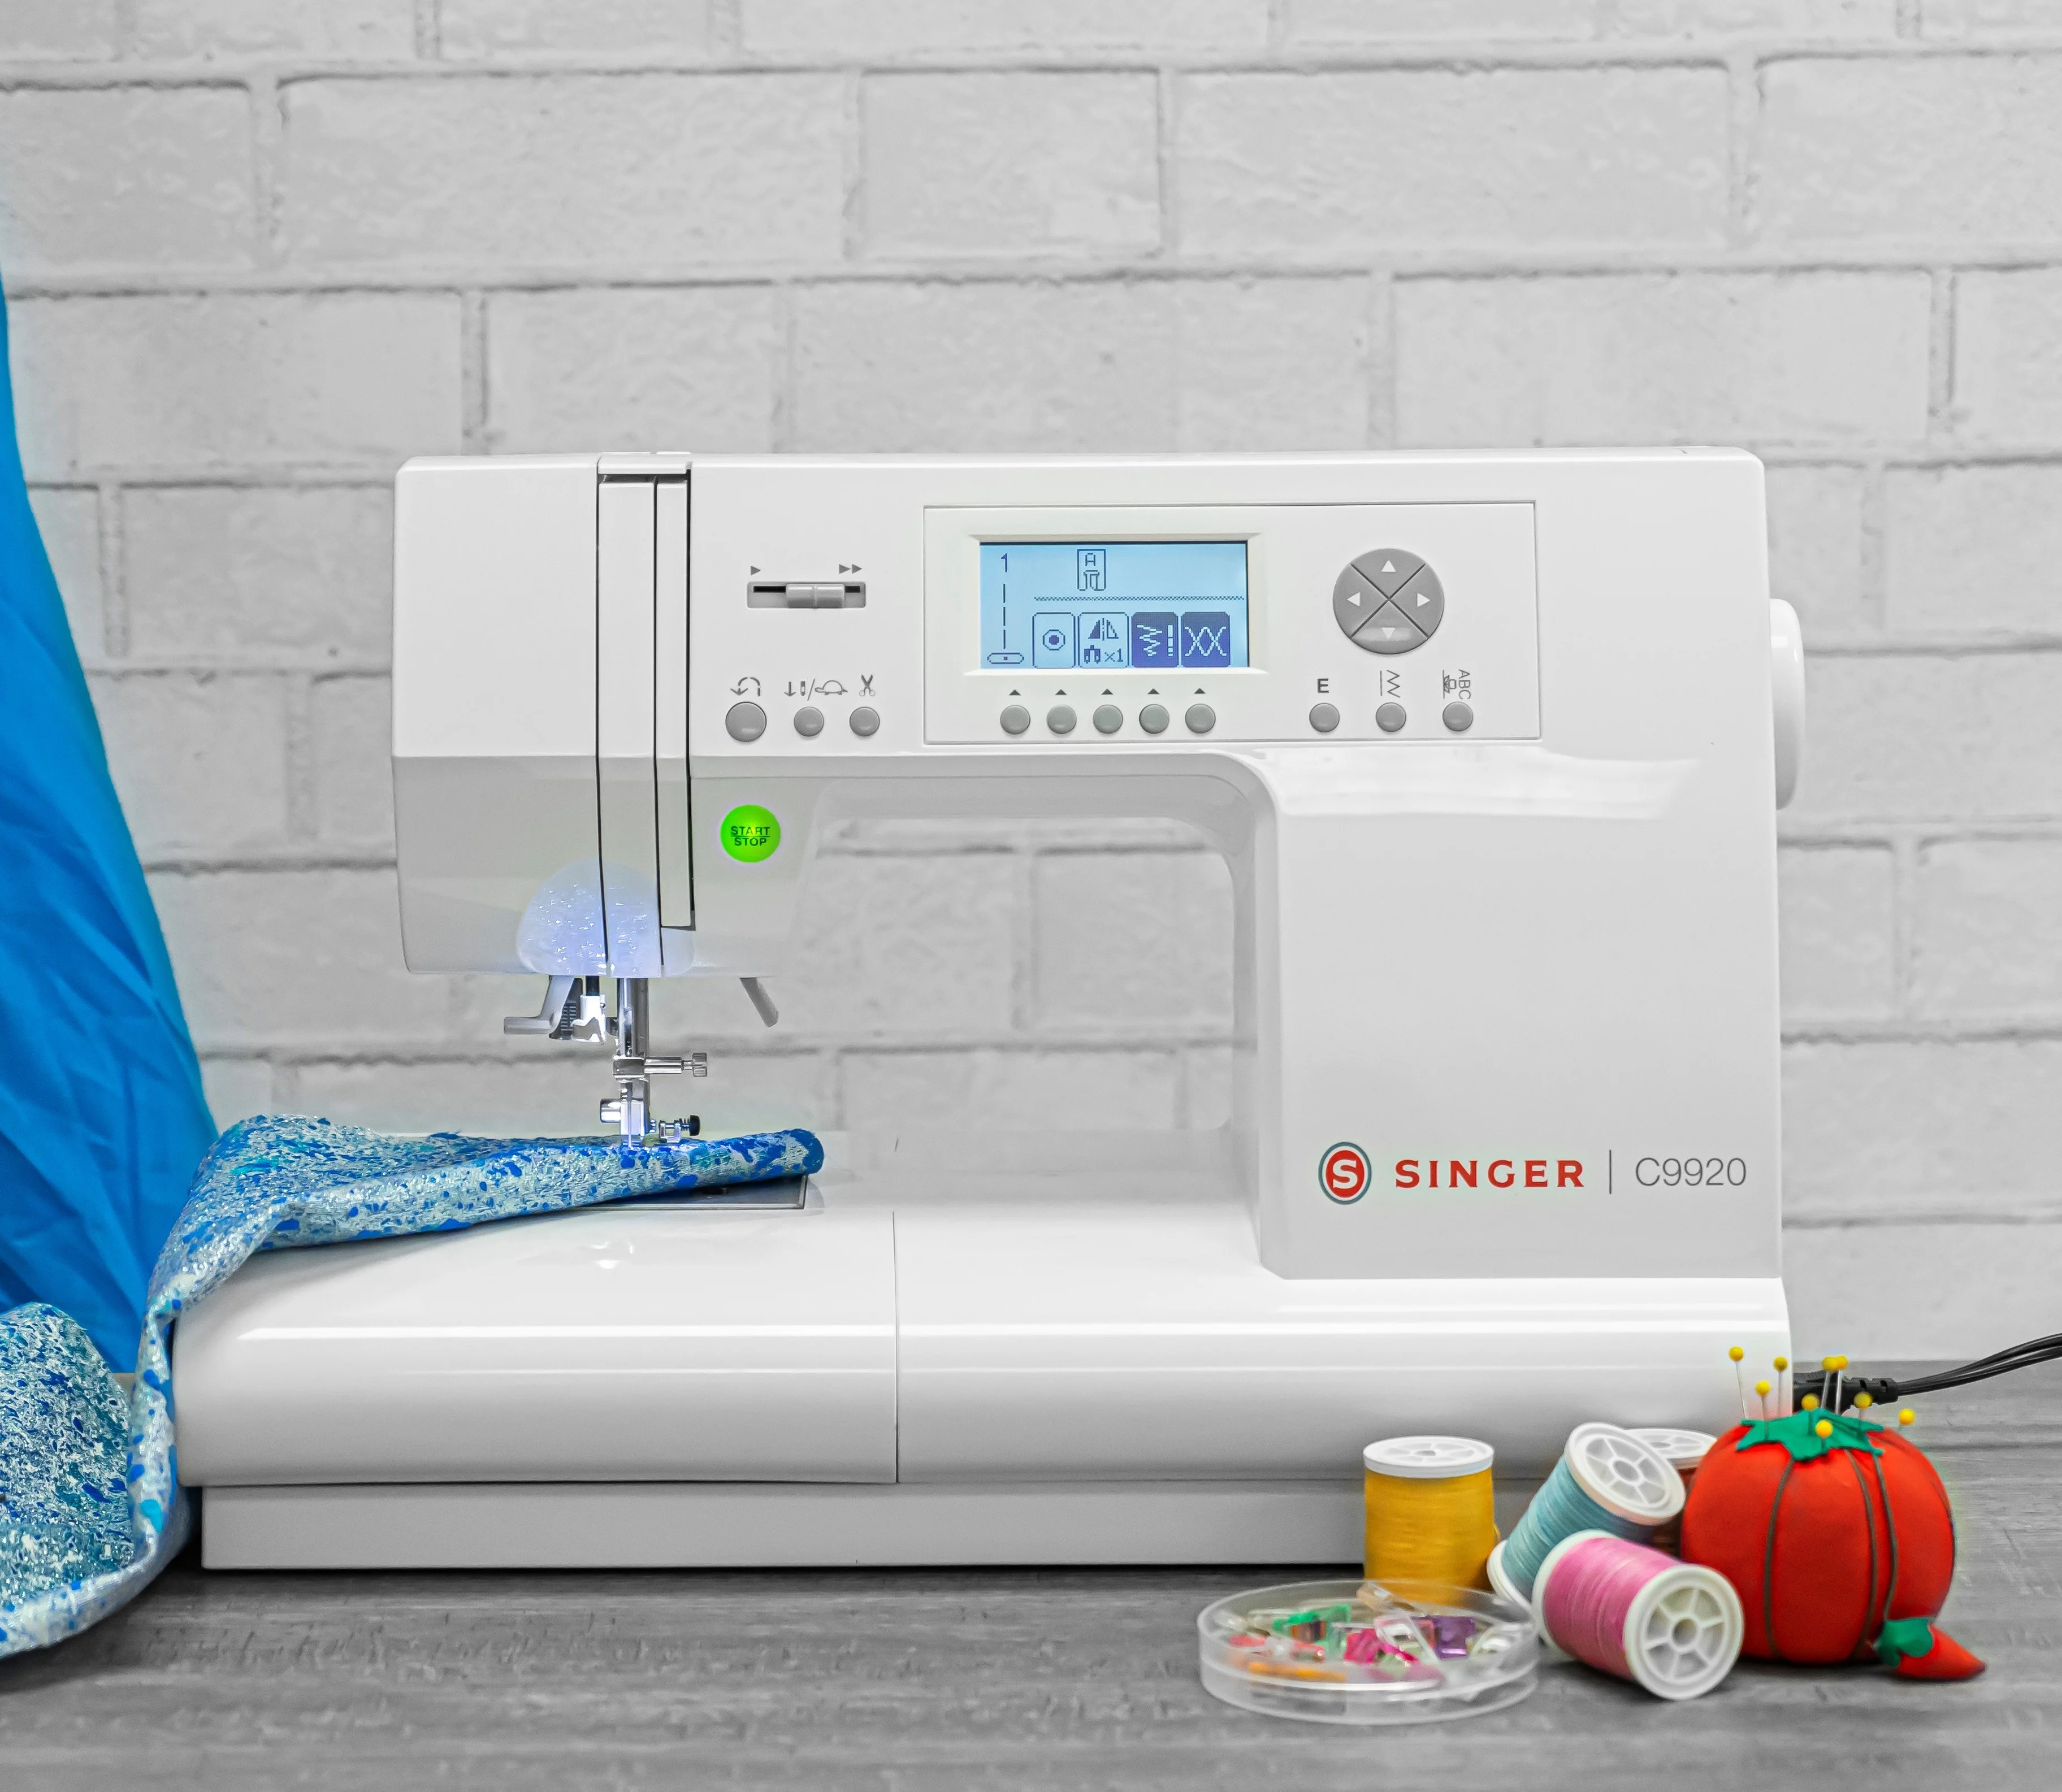 Singer C9920 Sewing Machine with decorations